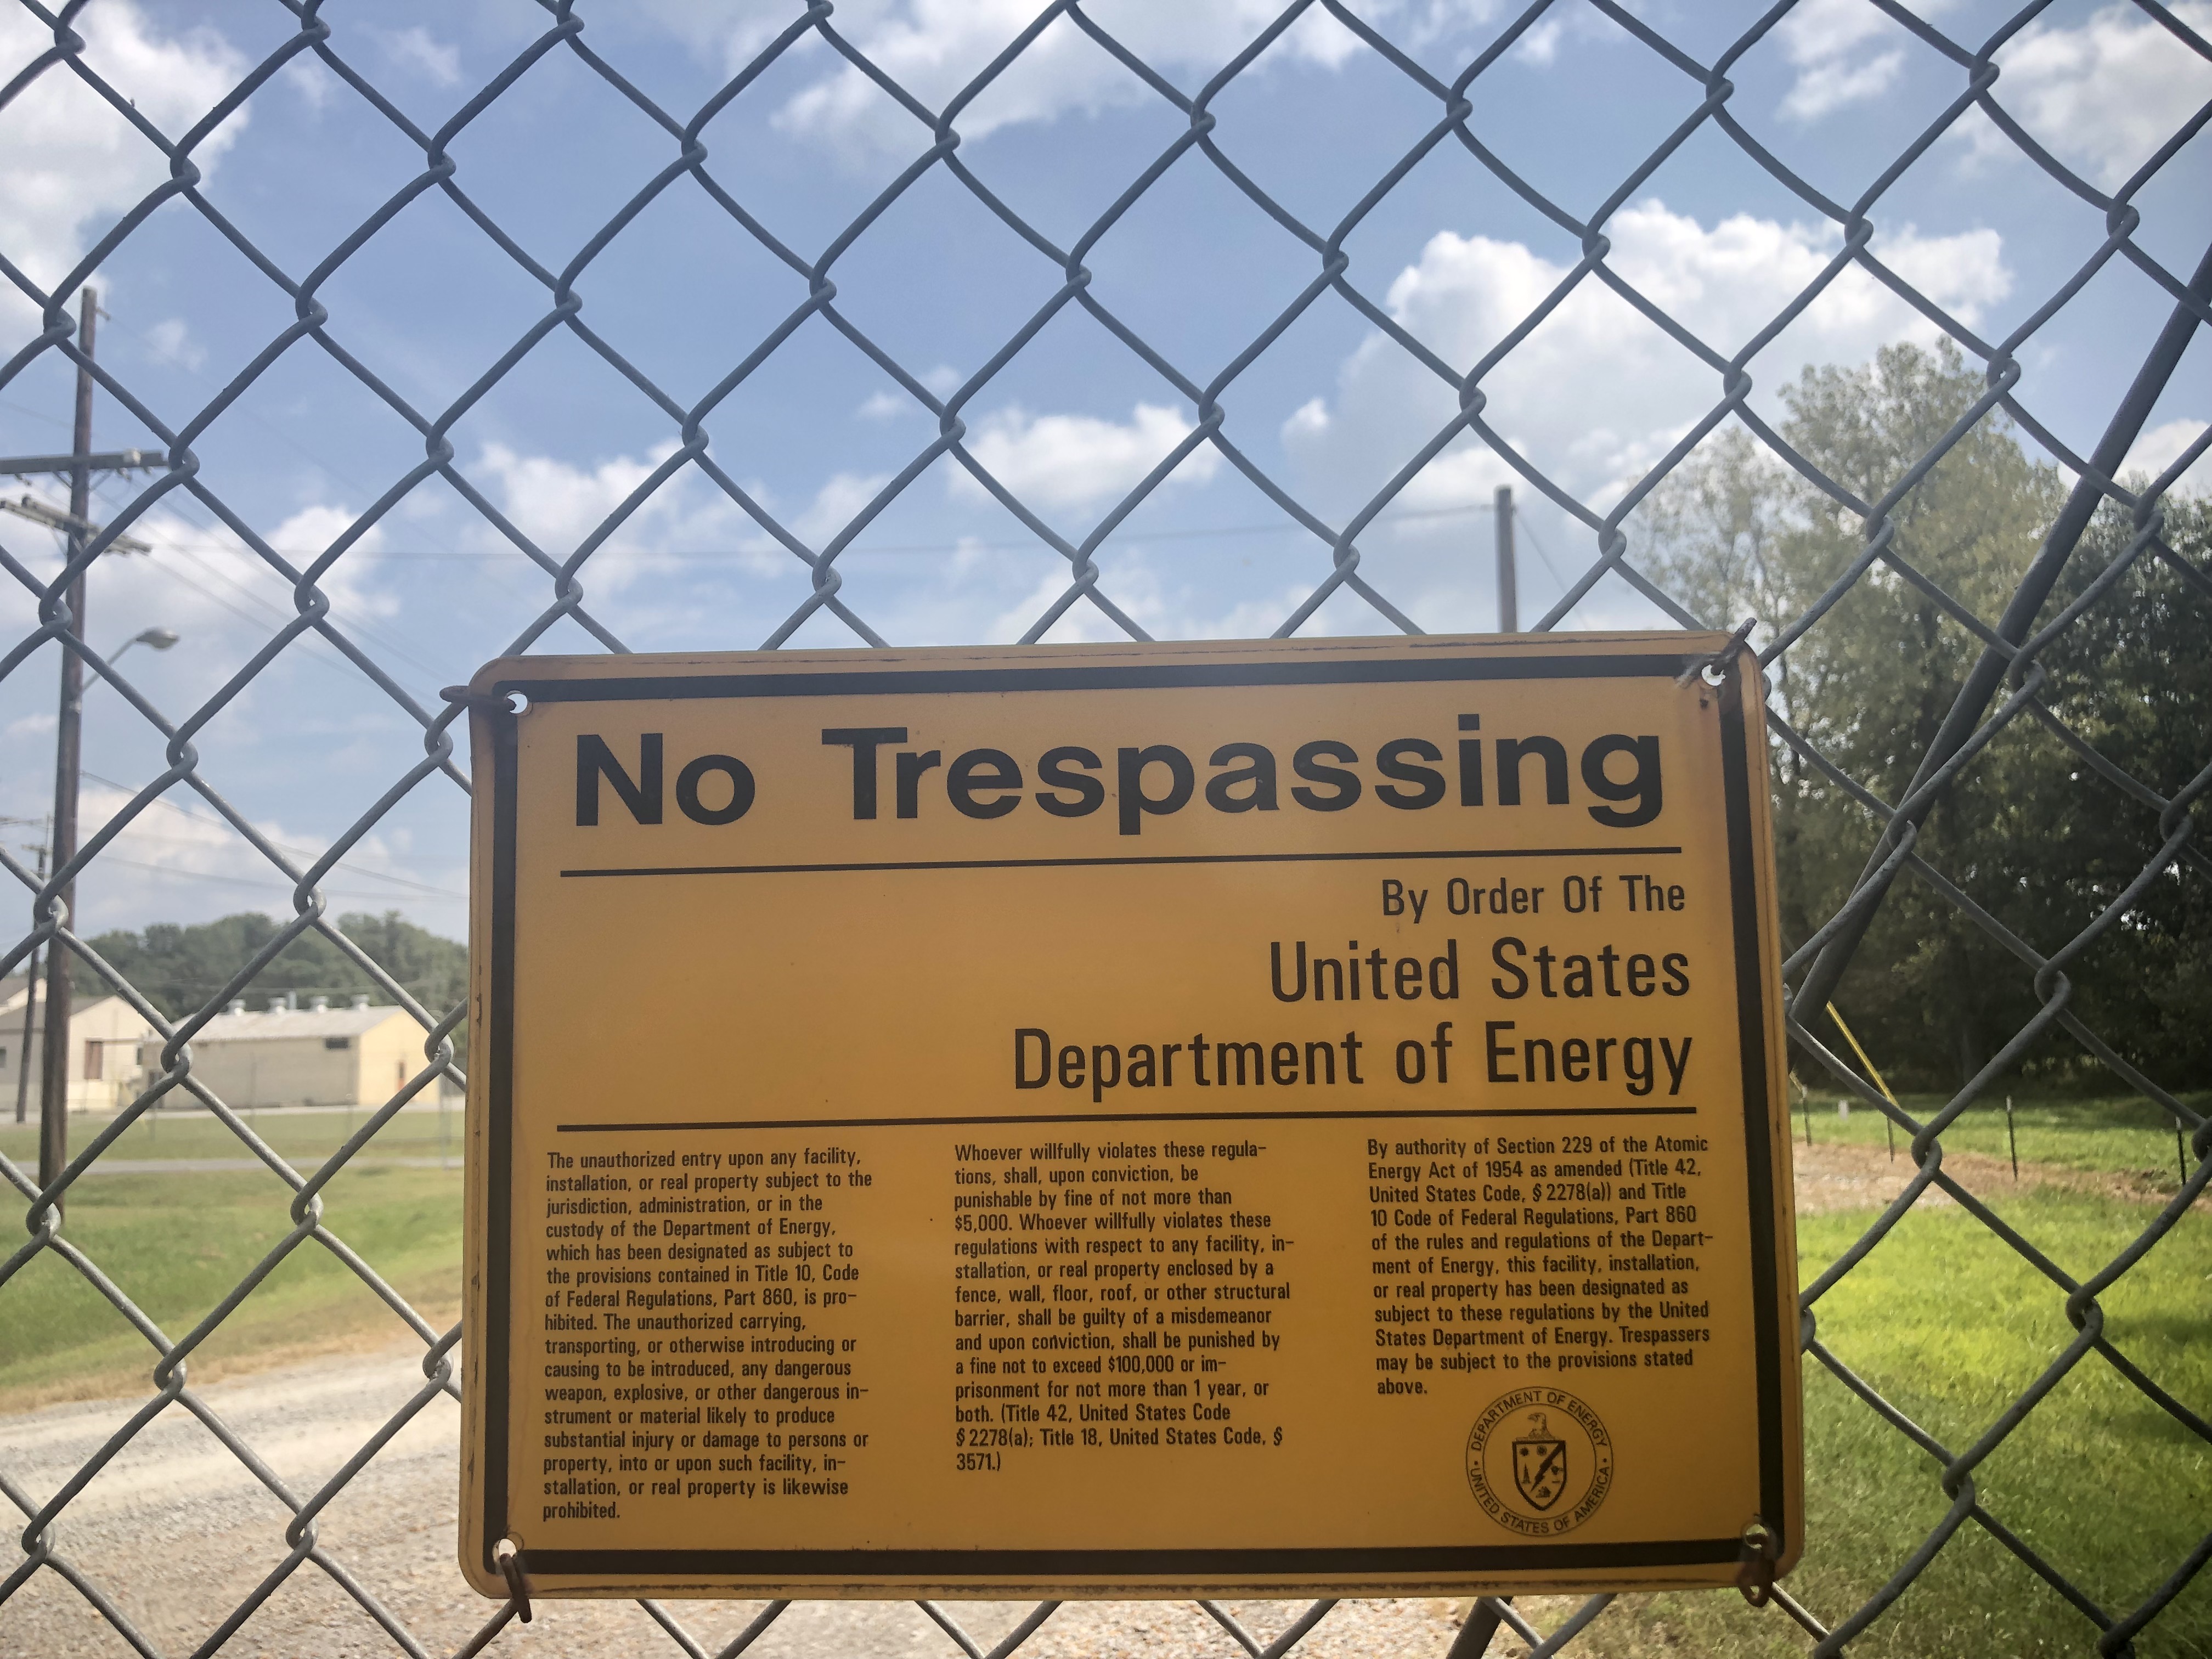 Yellow sign on fence line that reads "No Trespassing By Order Of the United States Department of Energy. The fence line separates the West Kentucky Wildlife Management Area from the Paducah Gaseous Diffusion Plant. In the distance, towers of the plant facilities are visible.